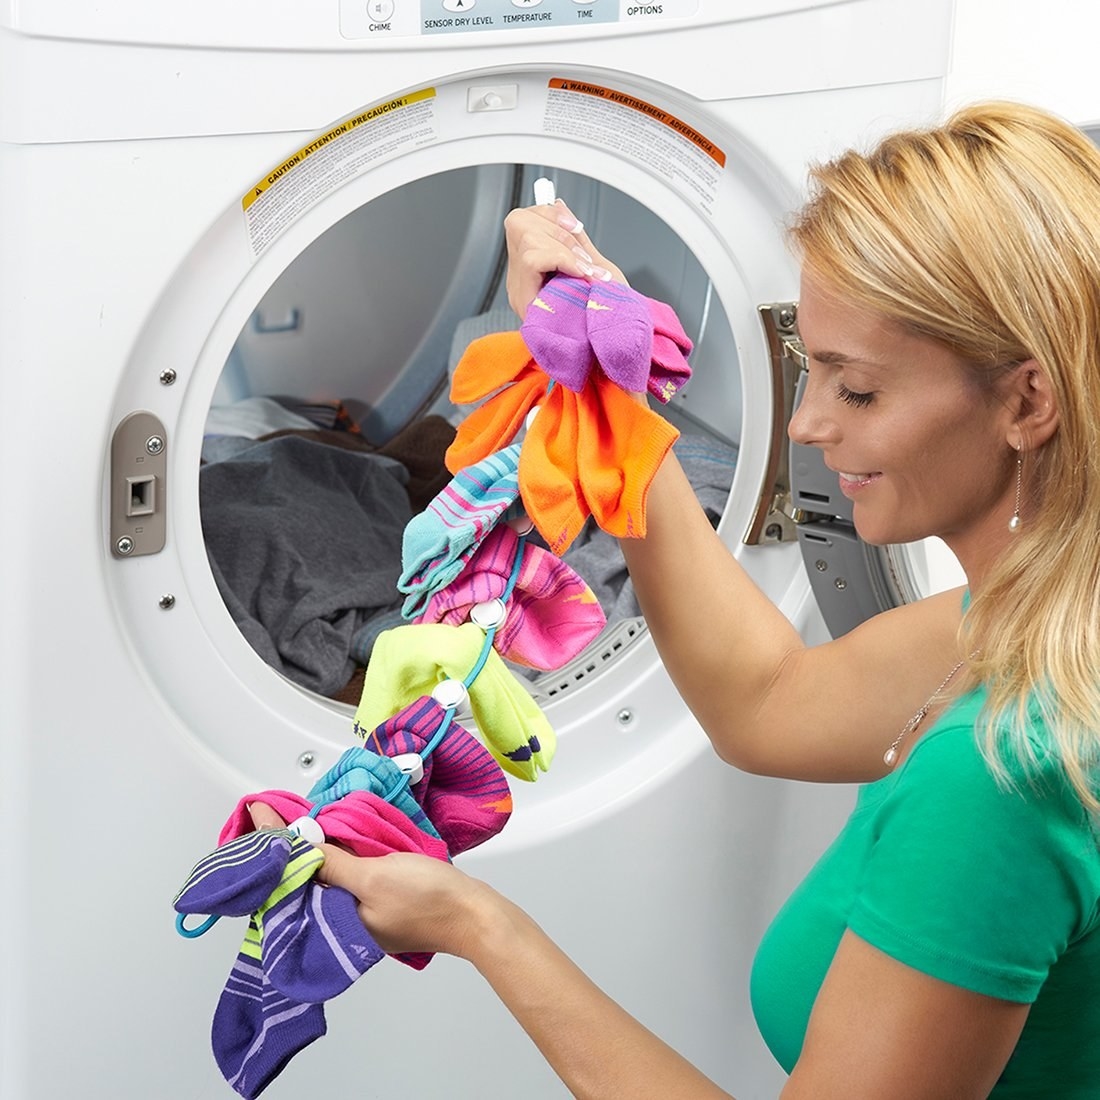 A person holding a long rope in front of a dryer The rope has multiple sets of socks attached to it